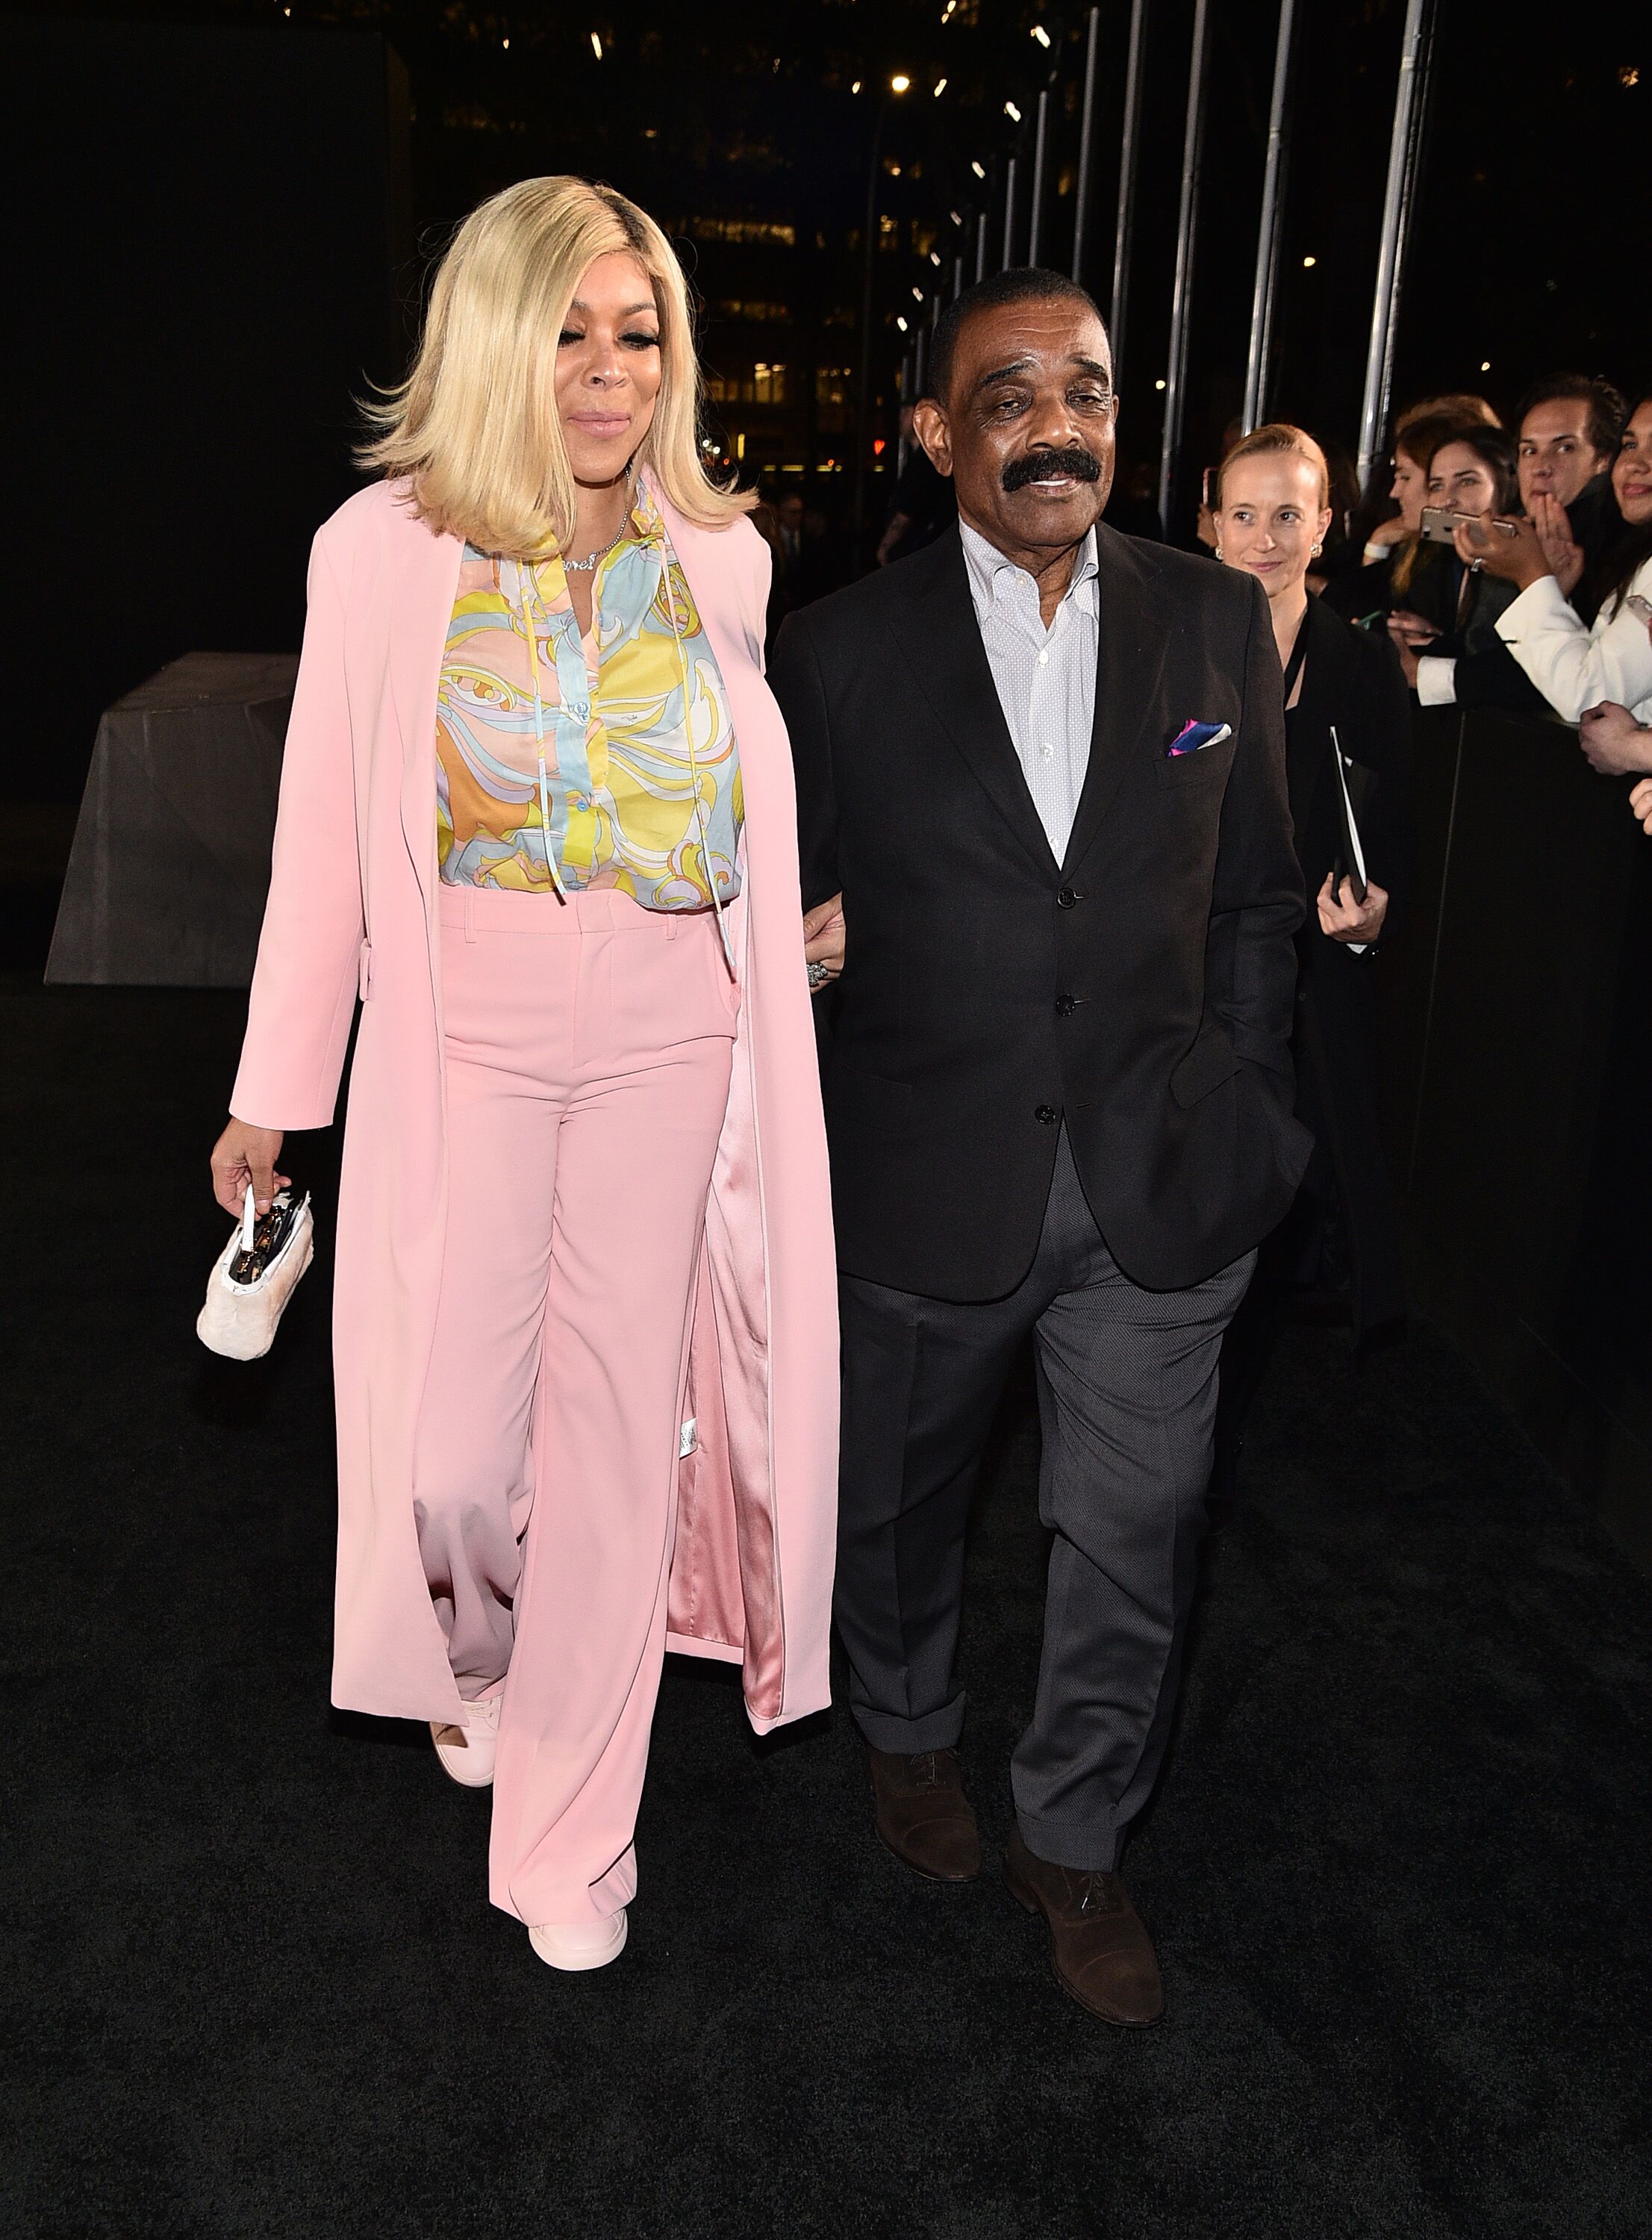 Wendy Williams at "The Morning Show" Premiere/ Source: Getty Images